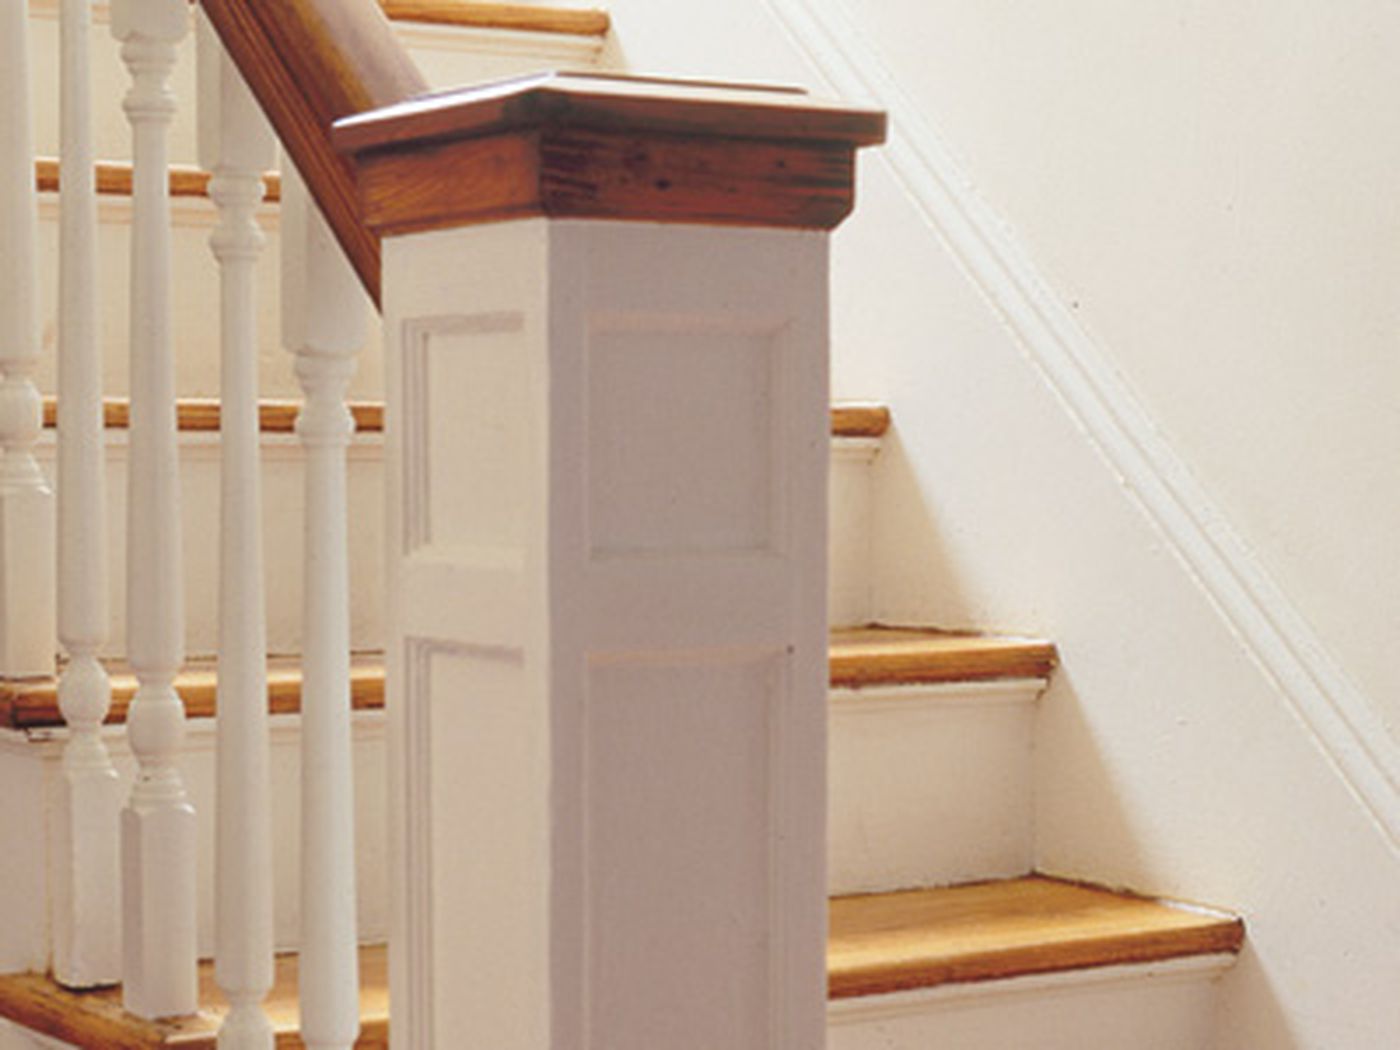 How do I change the spindles on my banister?